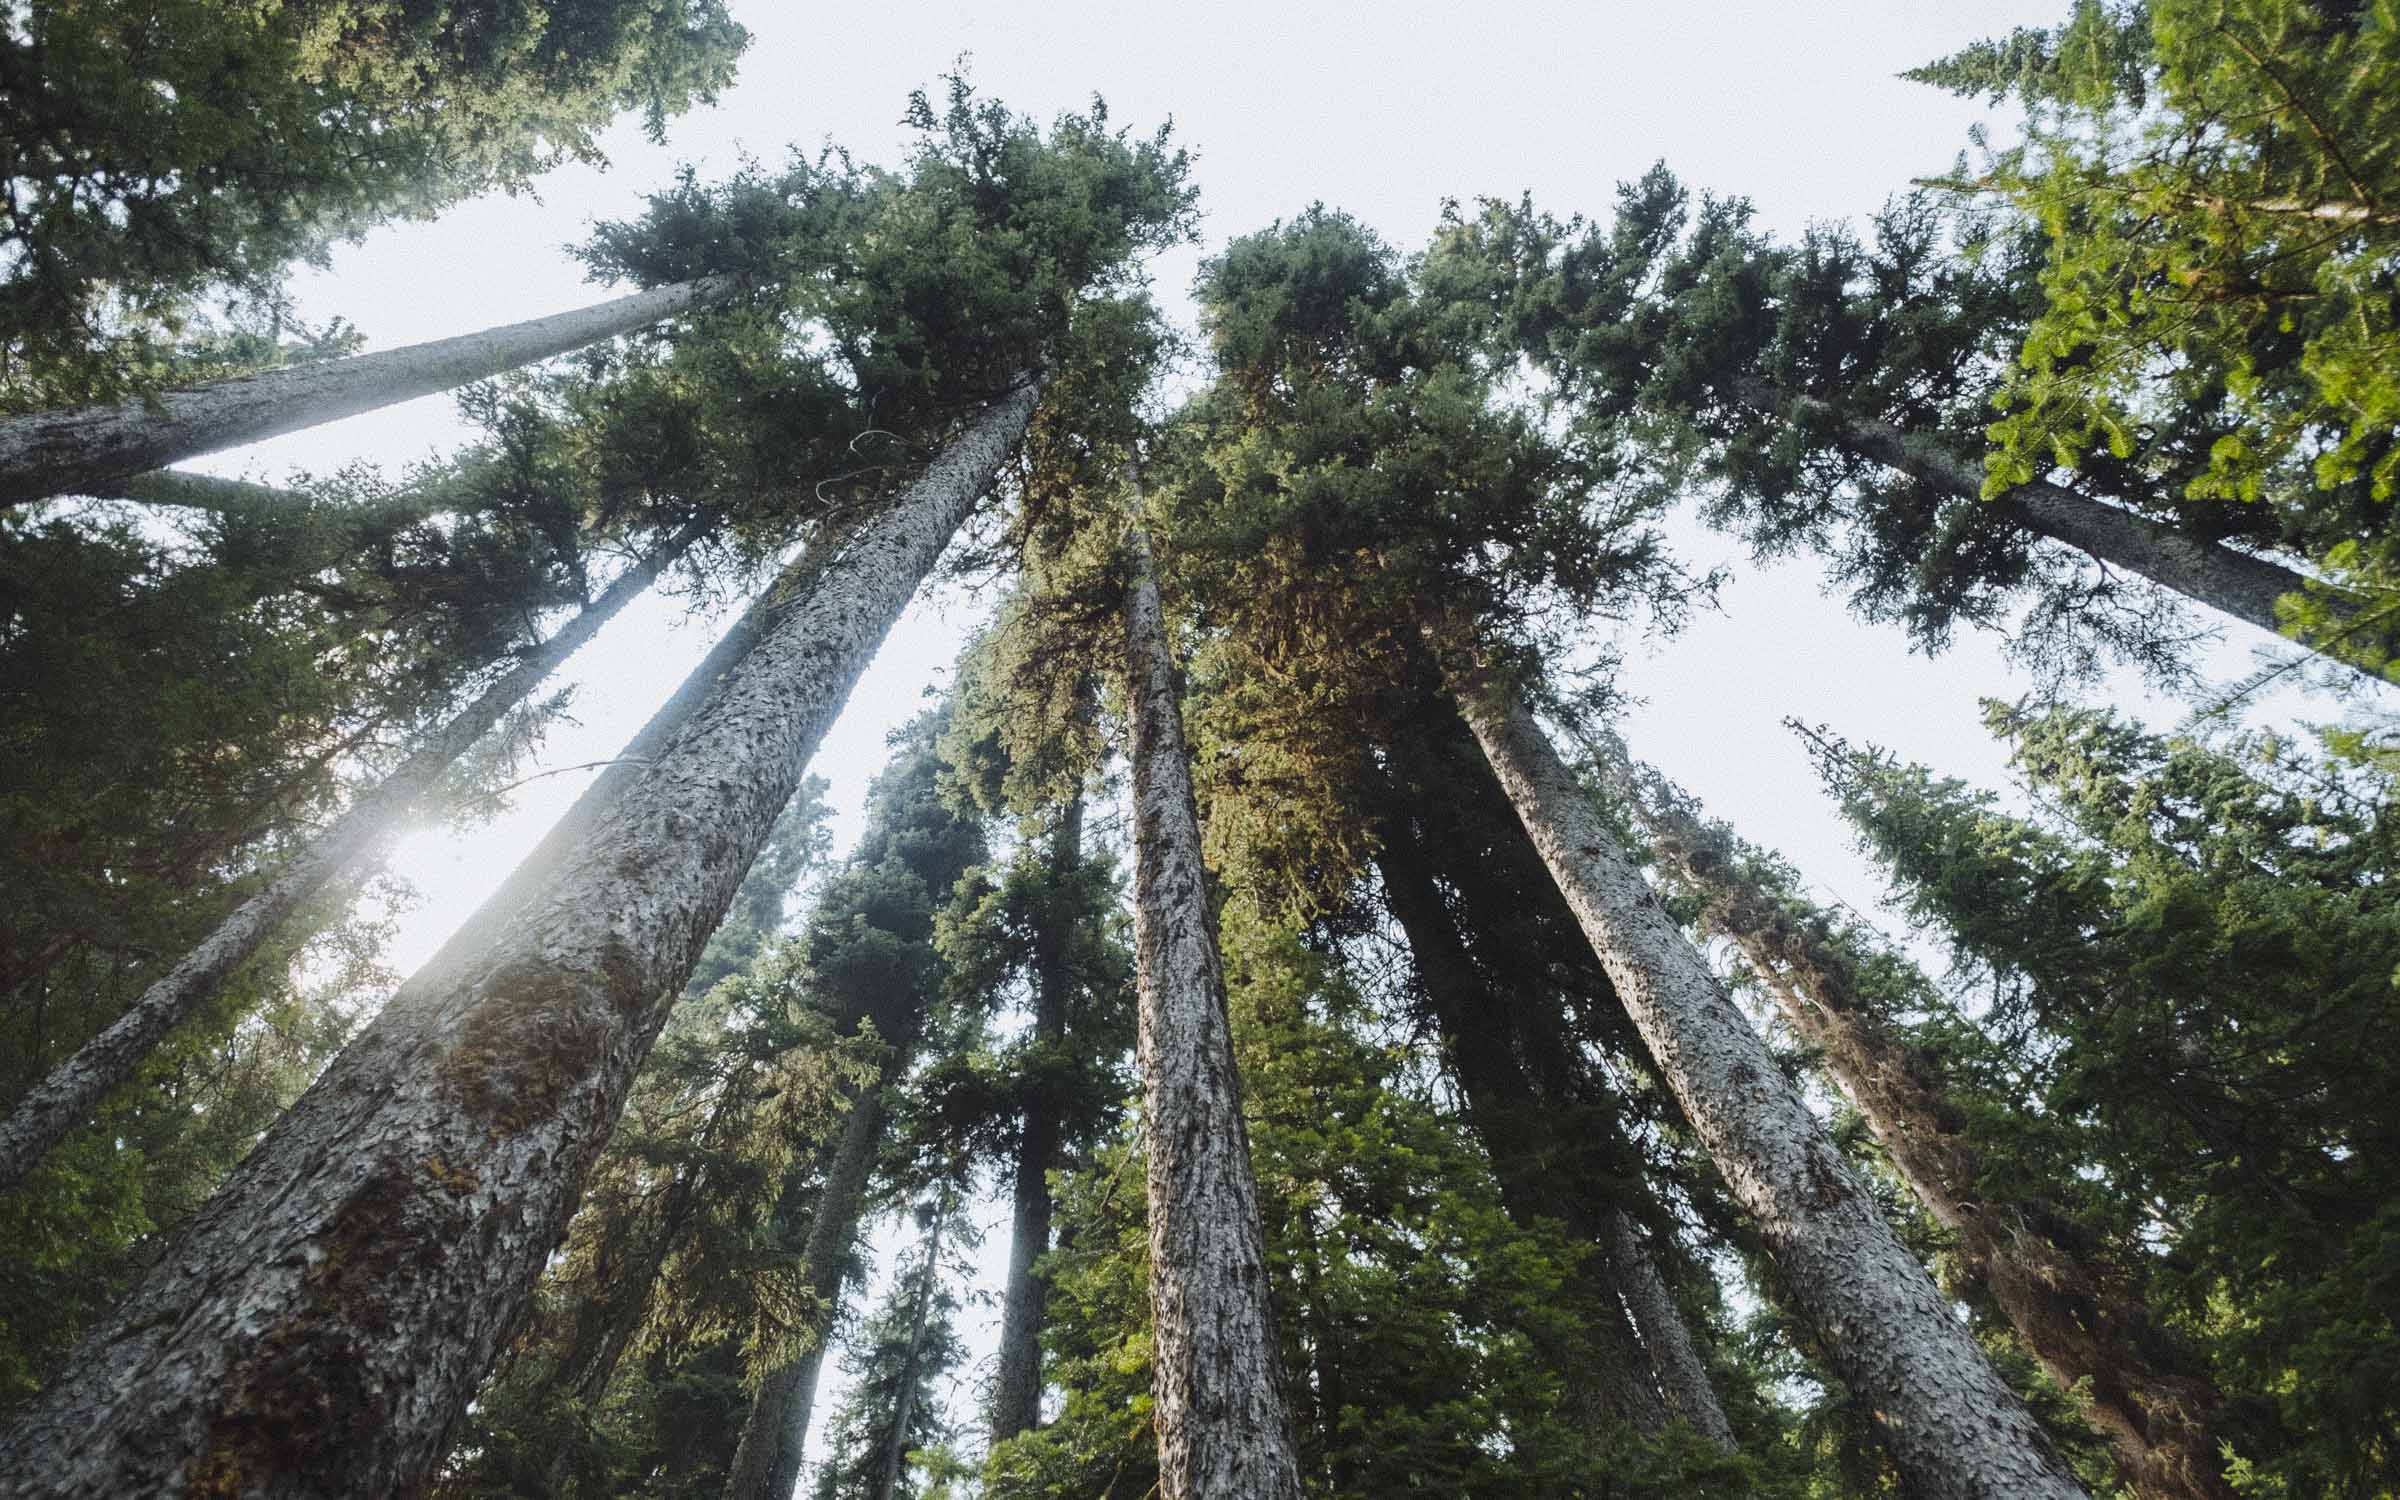 Hiking through the forests of BC